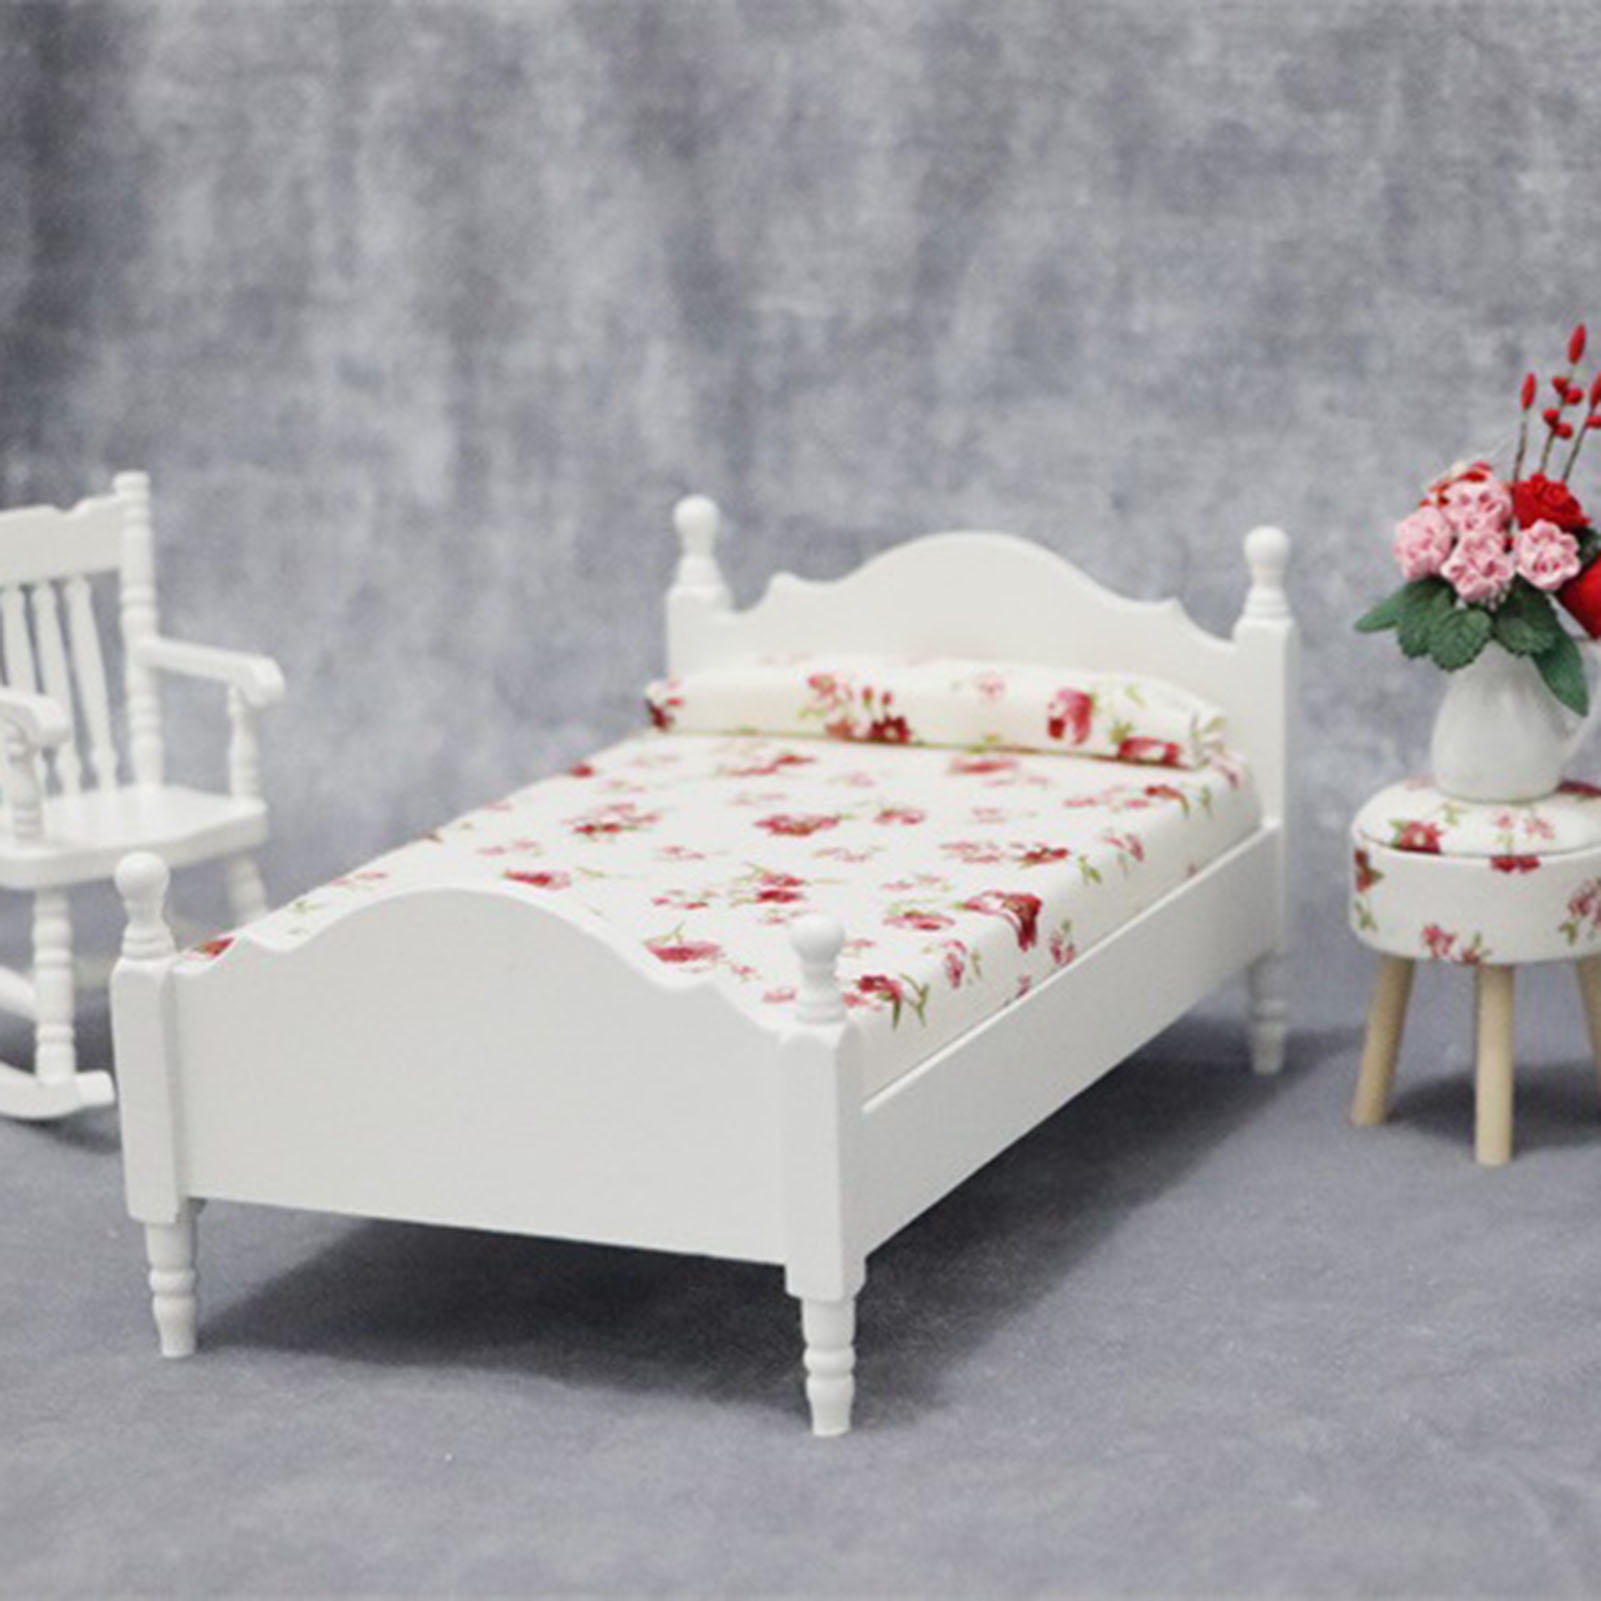 Details about   1/12 Doll House Upholstered Double Bed Bedroom Accessory Furniture Set Toys 